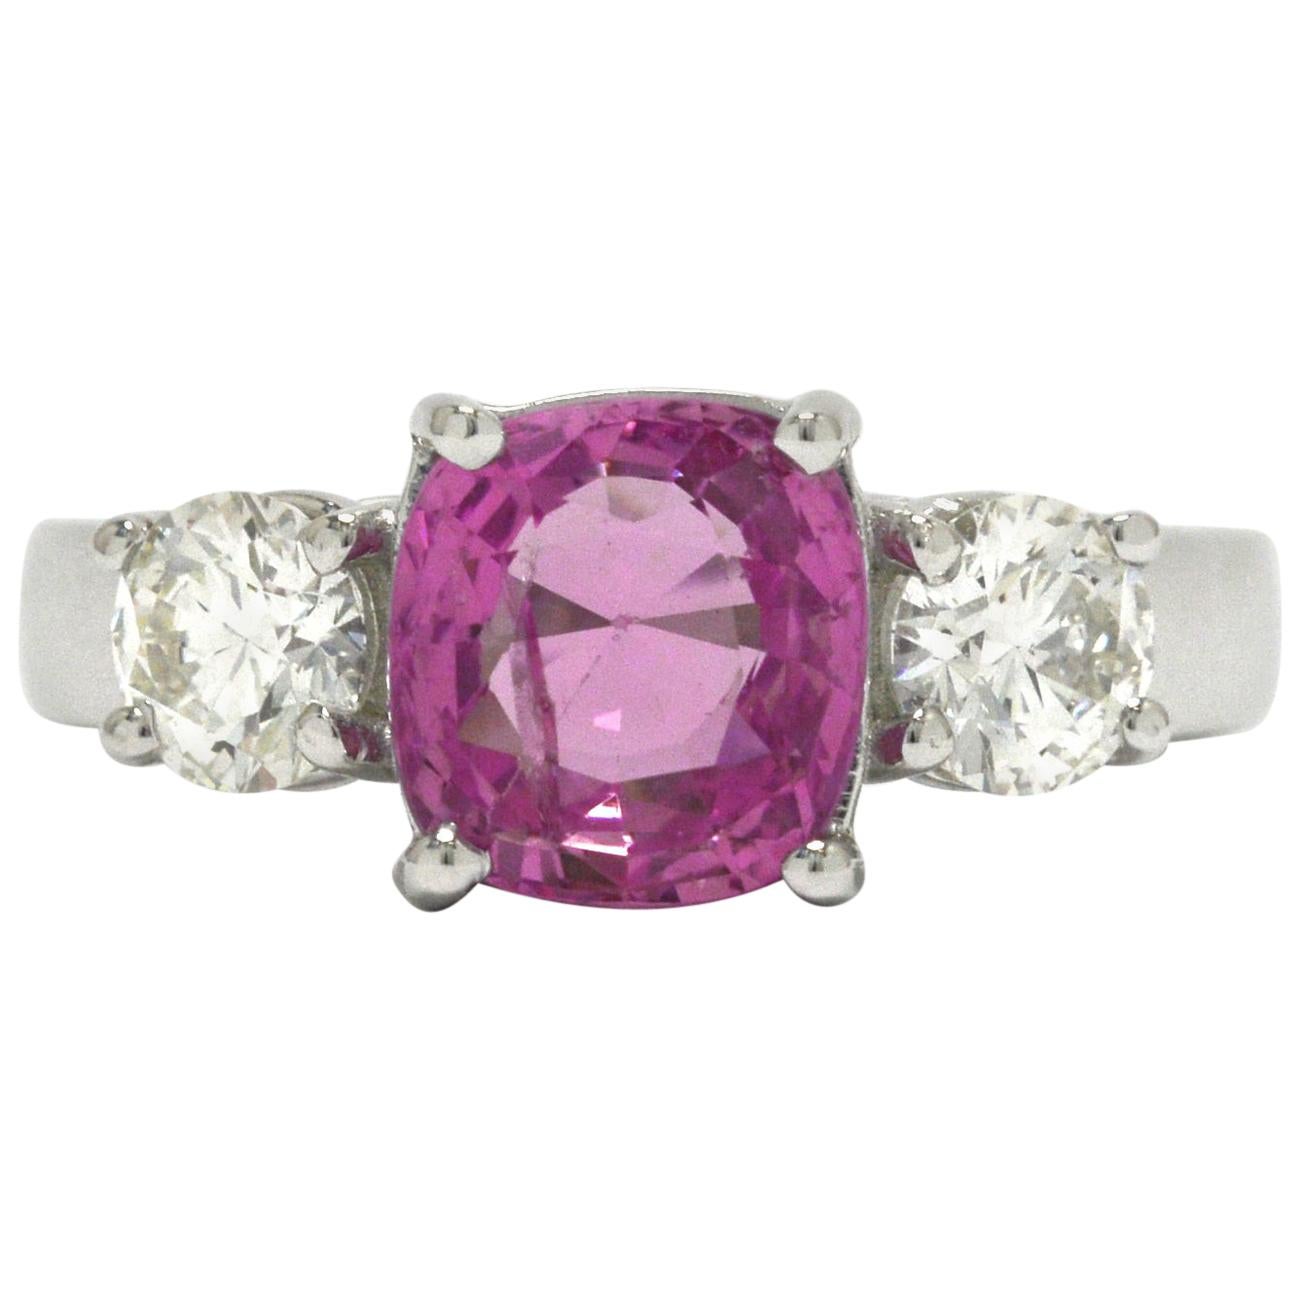 GIA Certified Classic Pink Sapphire & Diamond 3 Stone Engagement Ring